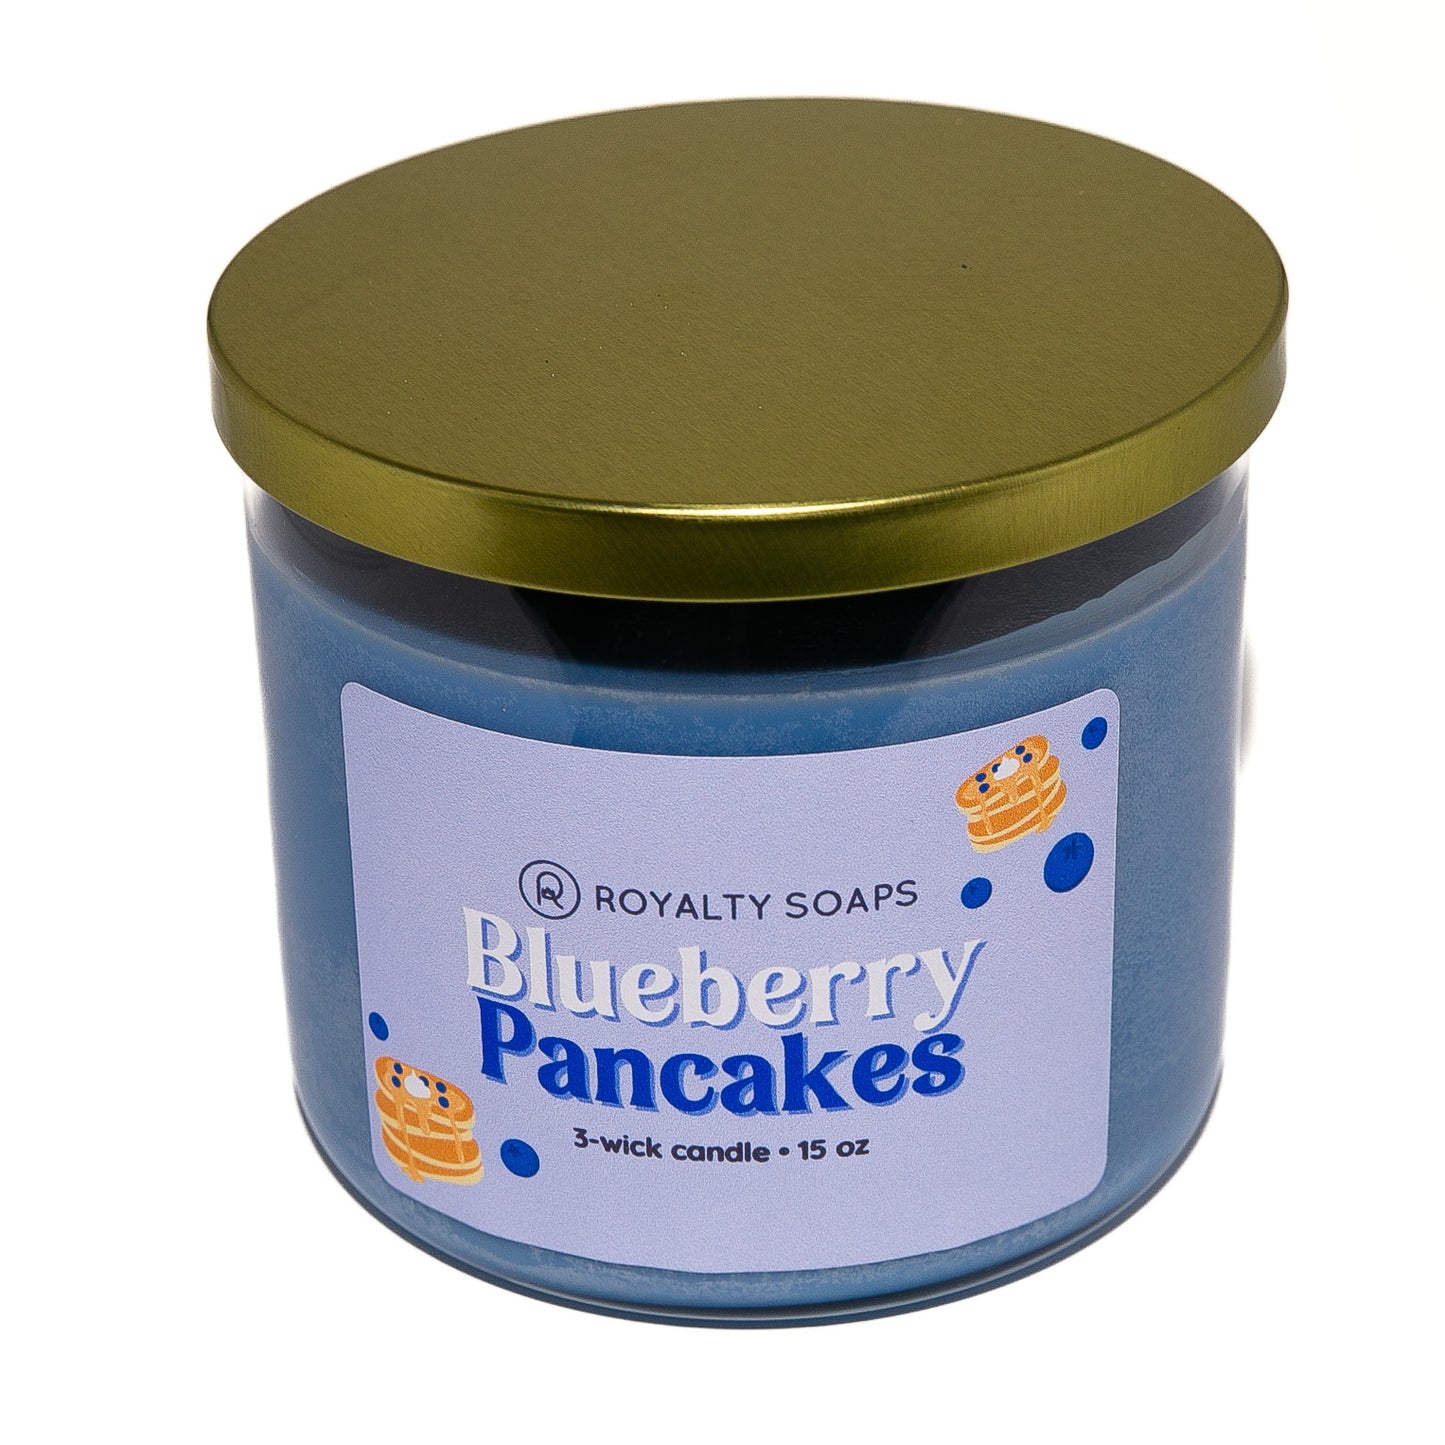 Blueberry Pancakes 3-Wick Soy Candle